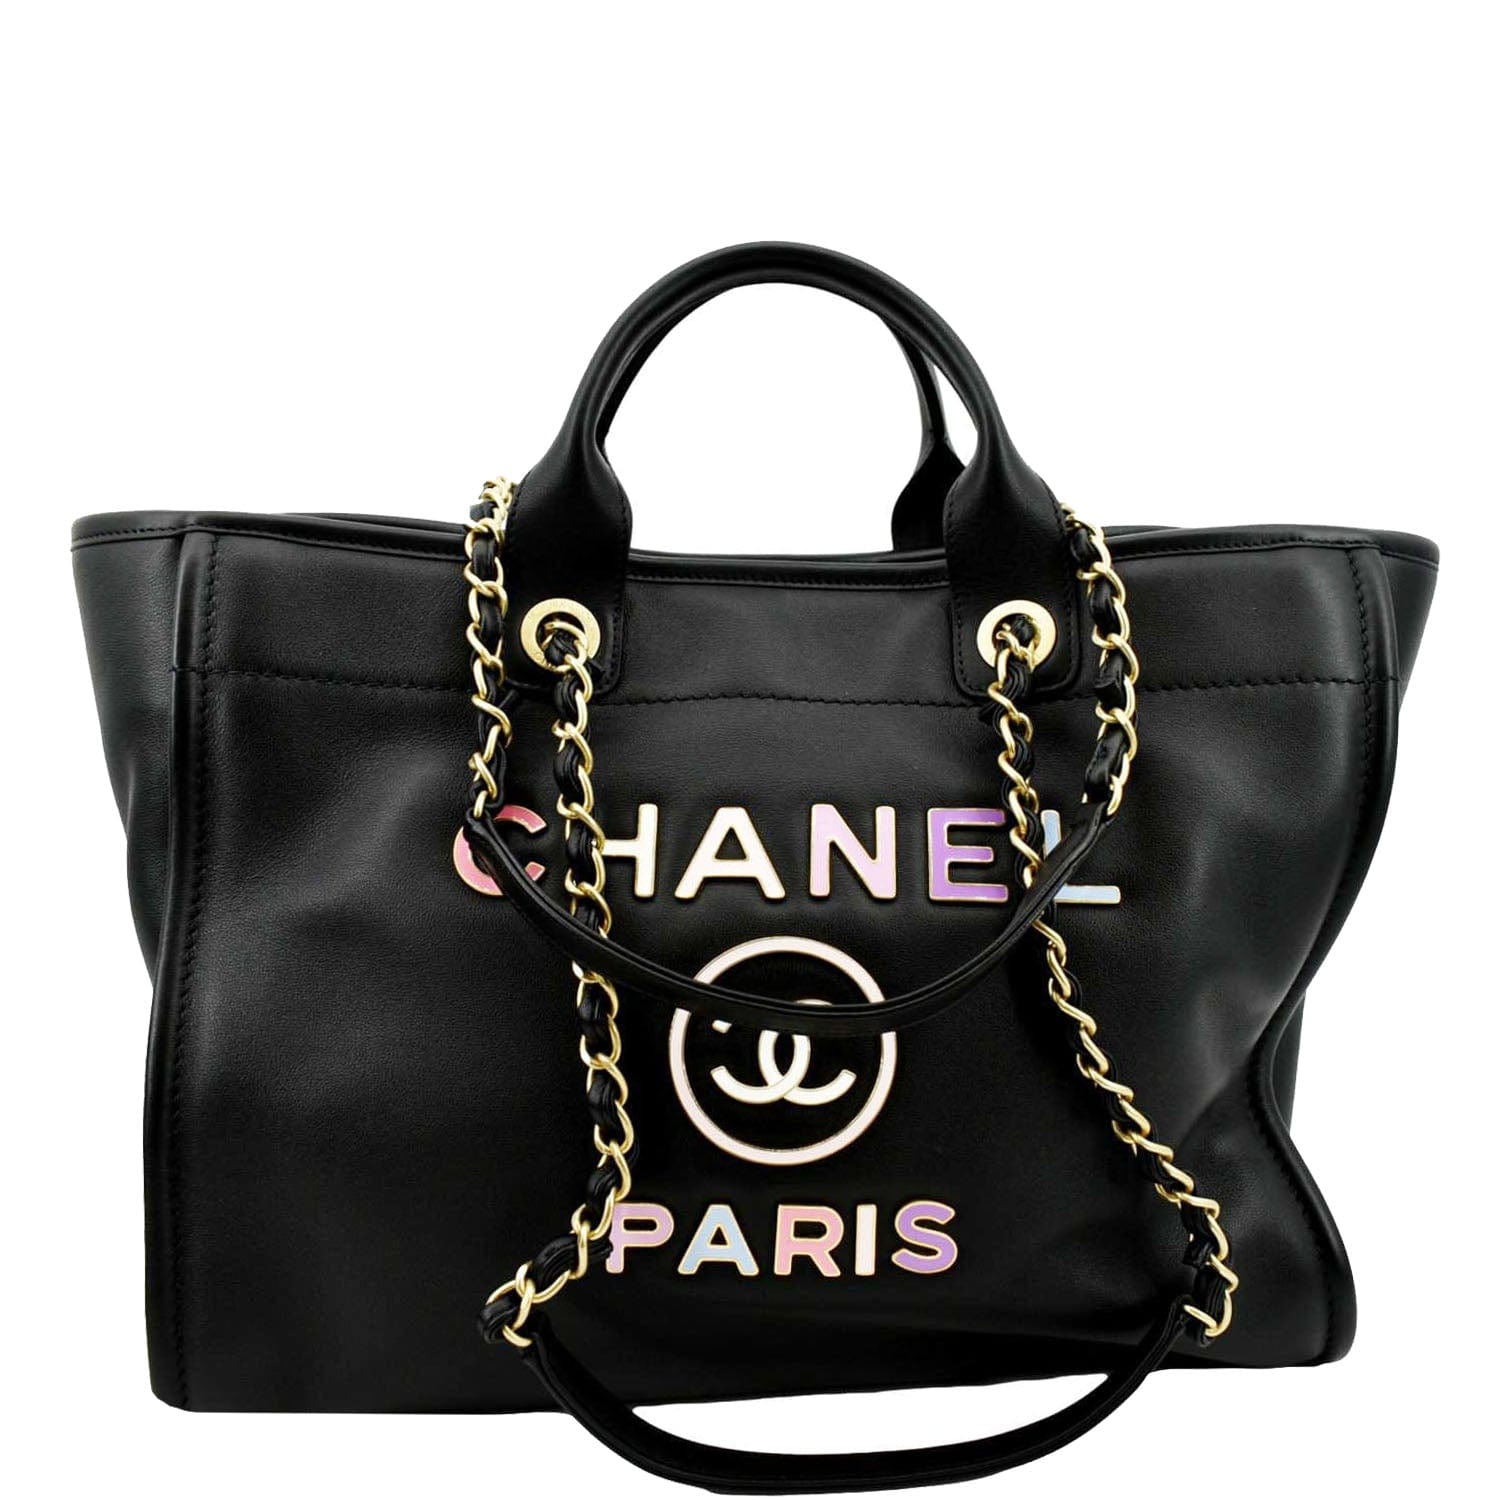 The Vintage Chanel Deauville Bag V's The Modern Deauville Tote